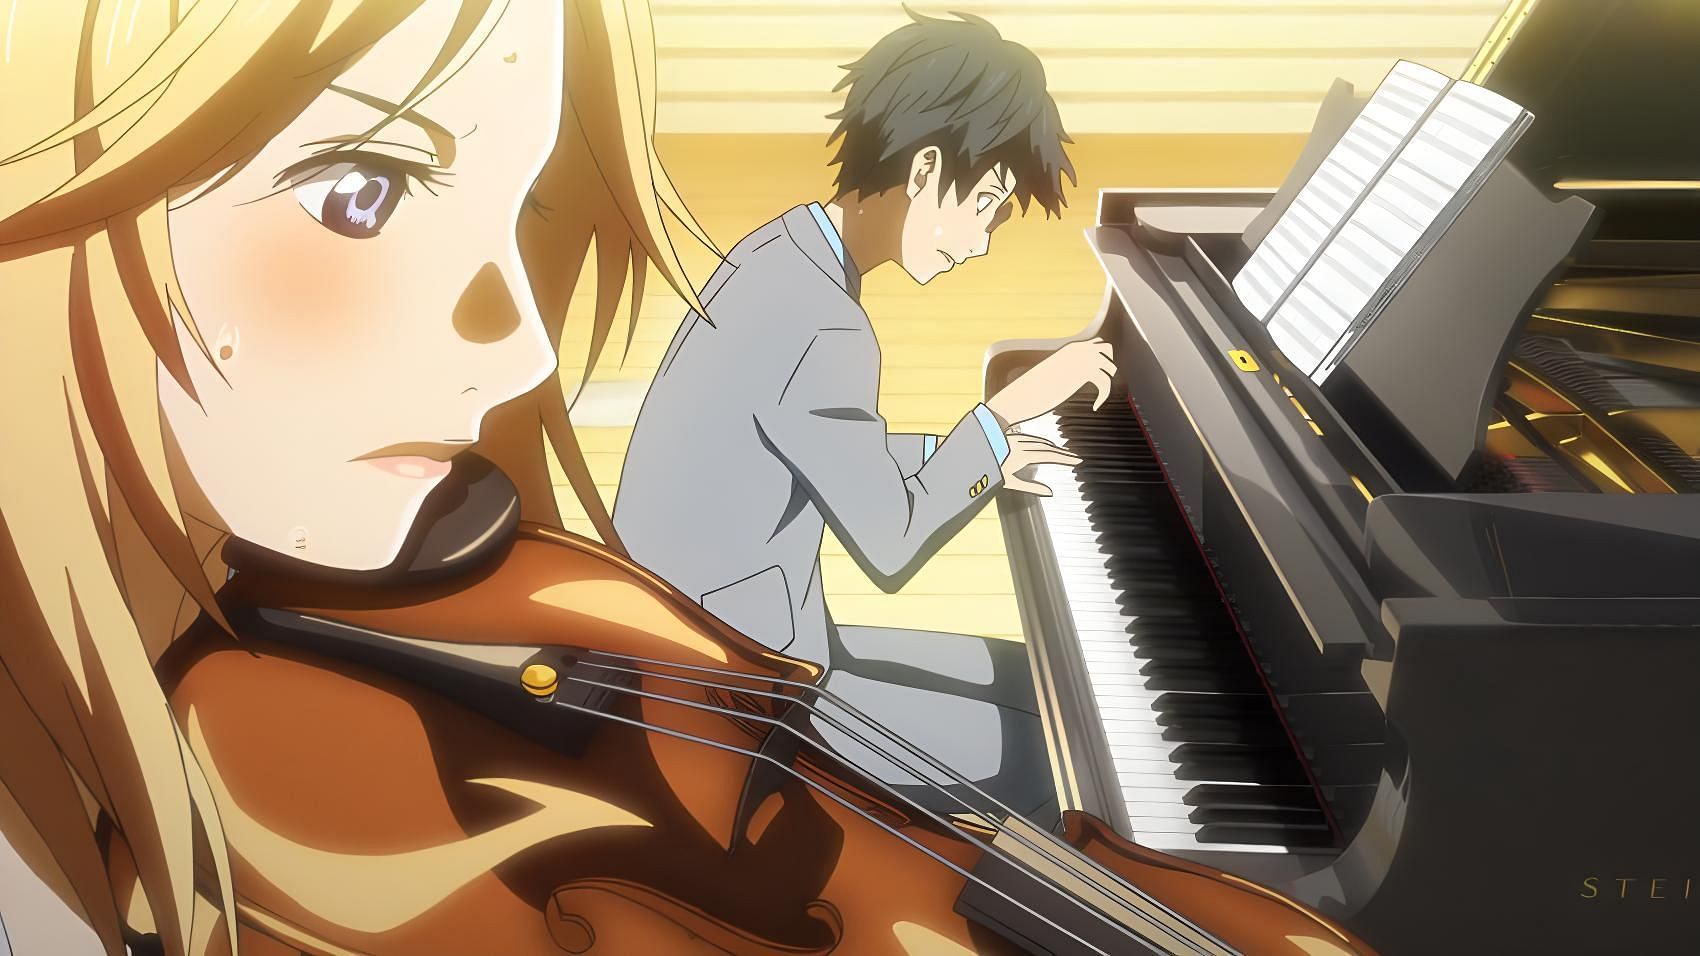 Kaori and Kosei as seen in the anime &quot;Your Lie in April&quot; (Image via A-1 Pictures)